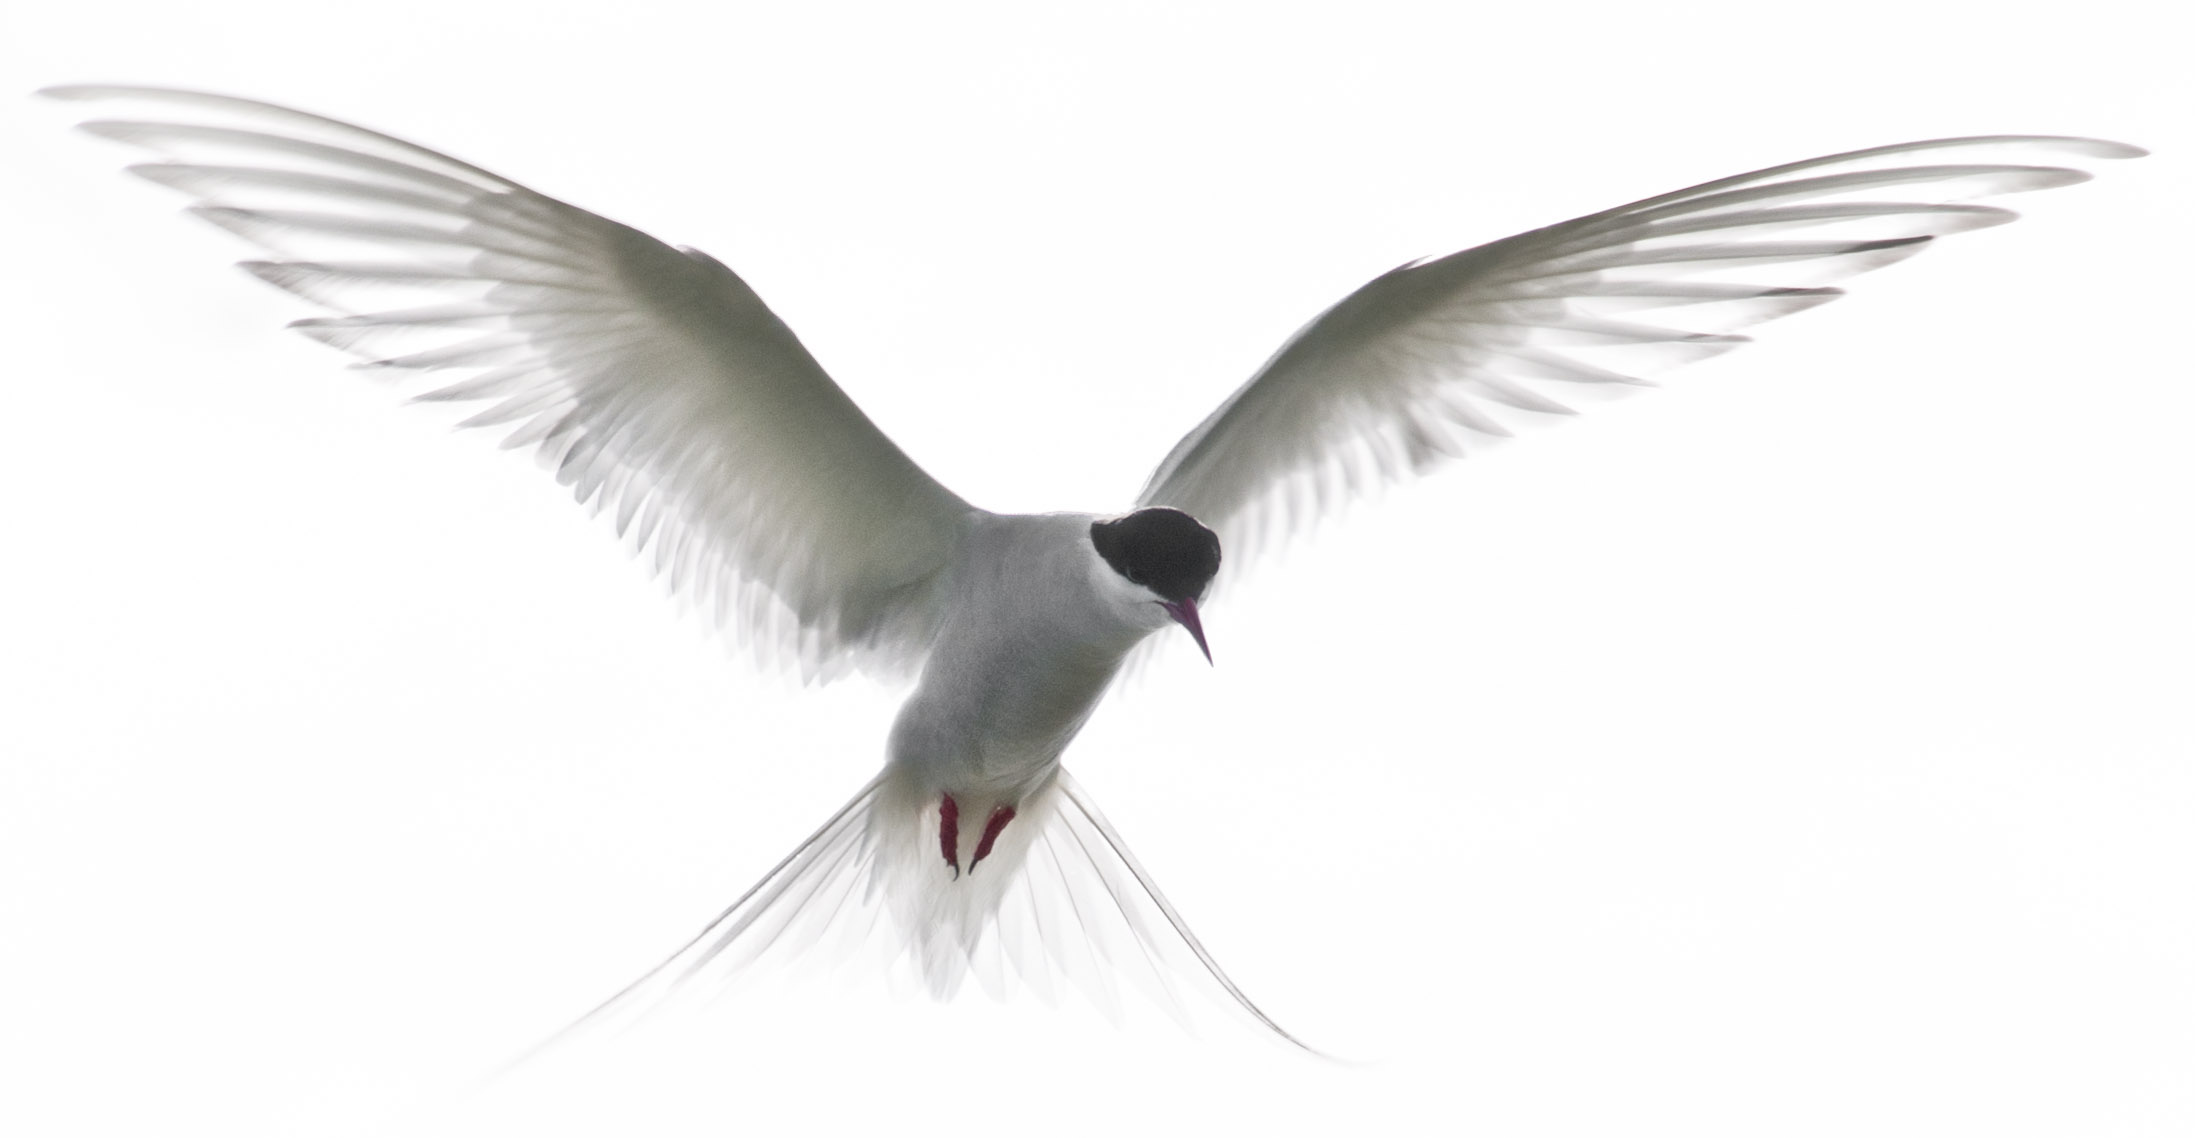 photograph of a bird flying against a white background